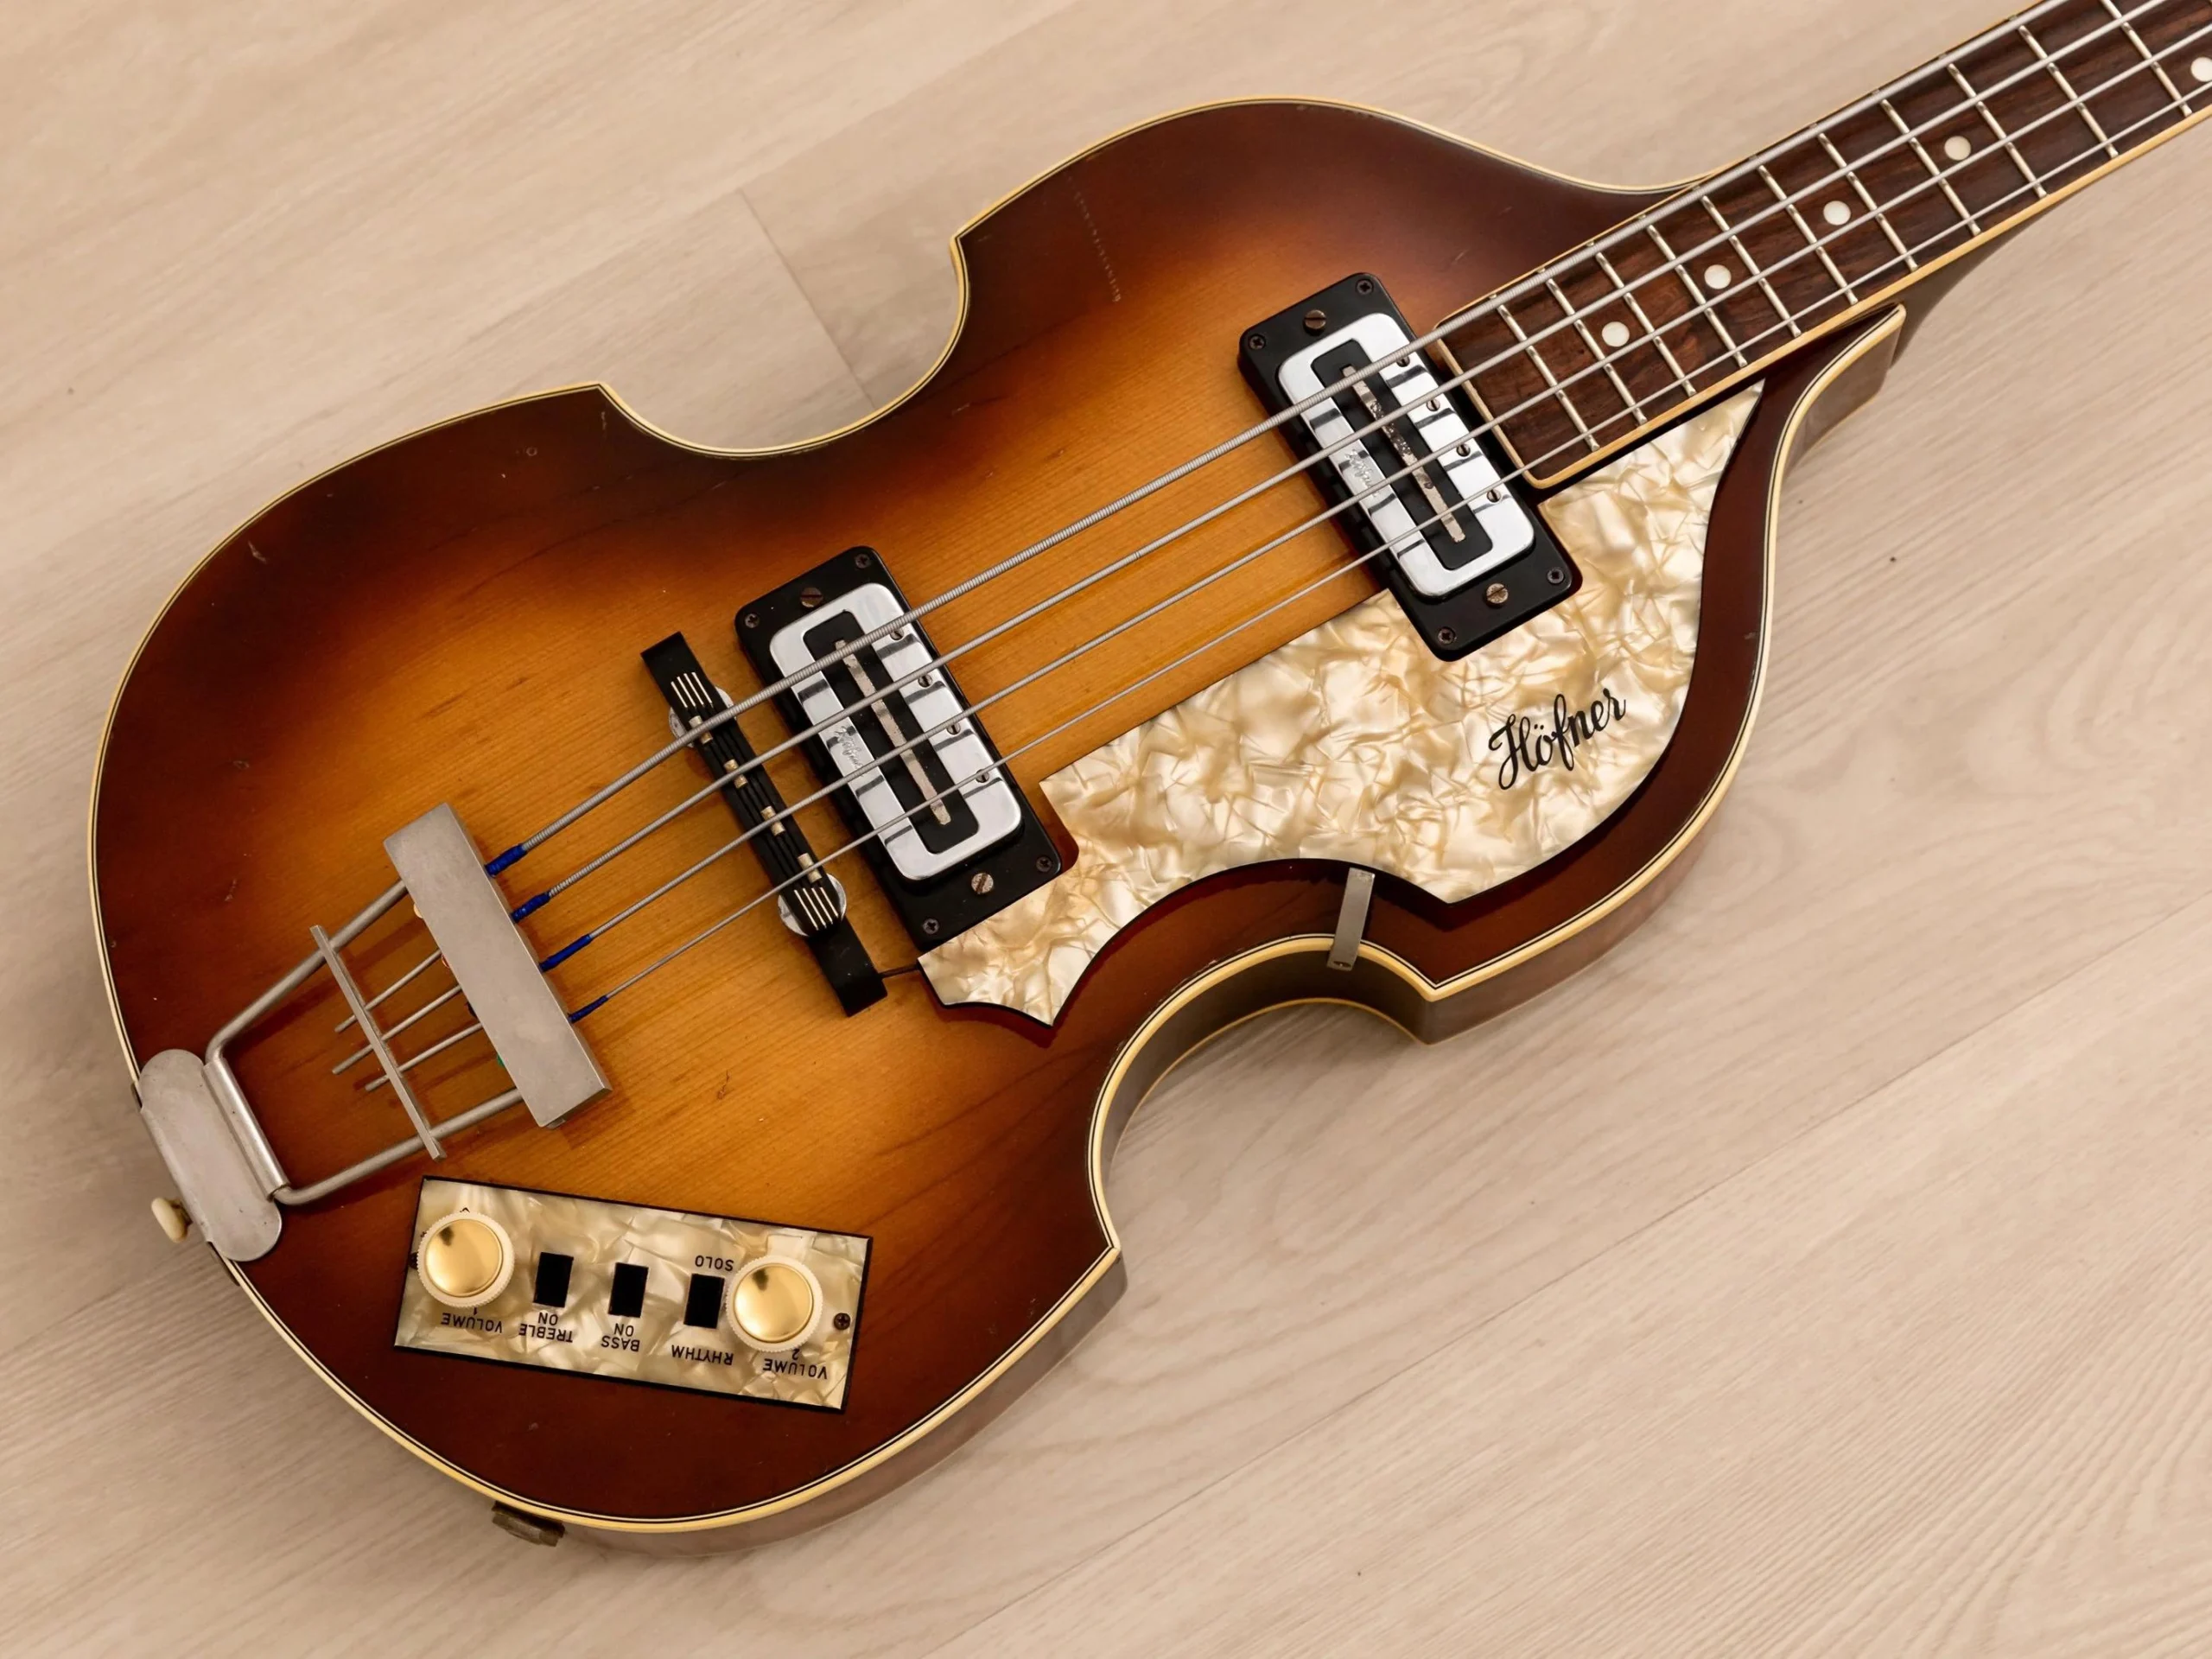 hofner violin bass original - How can you tell what year a Hofner bass is